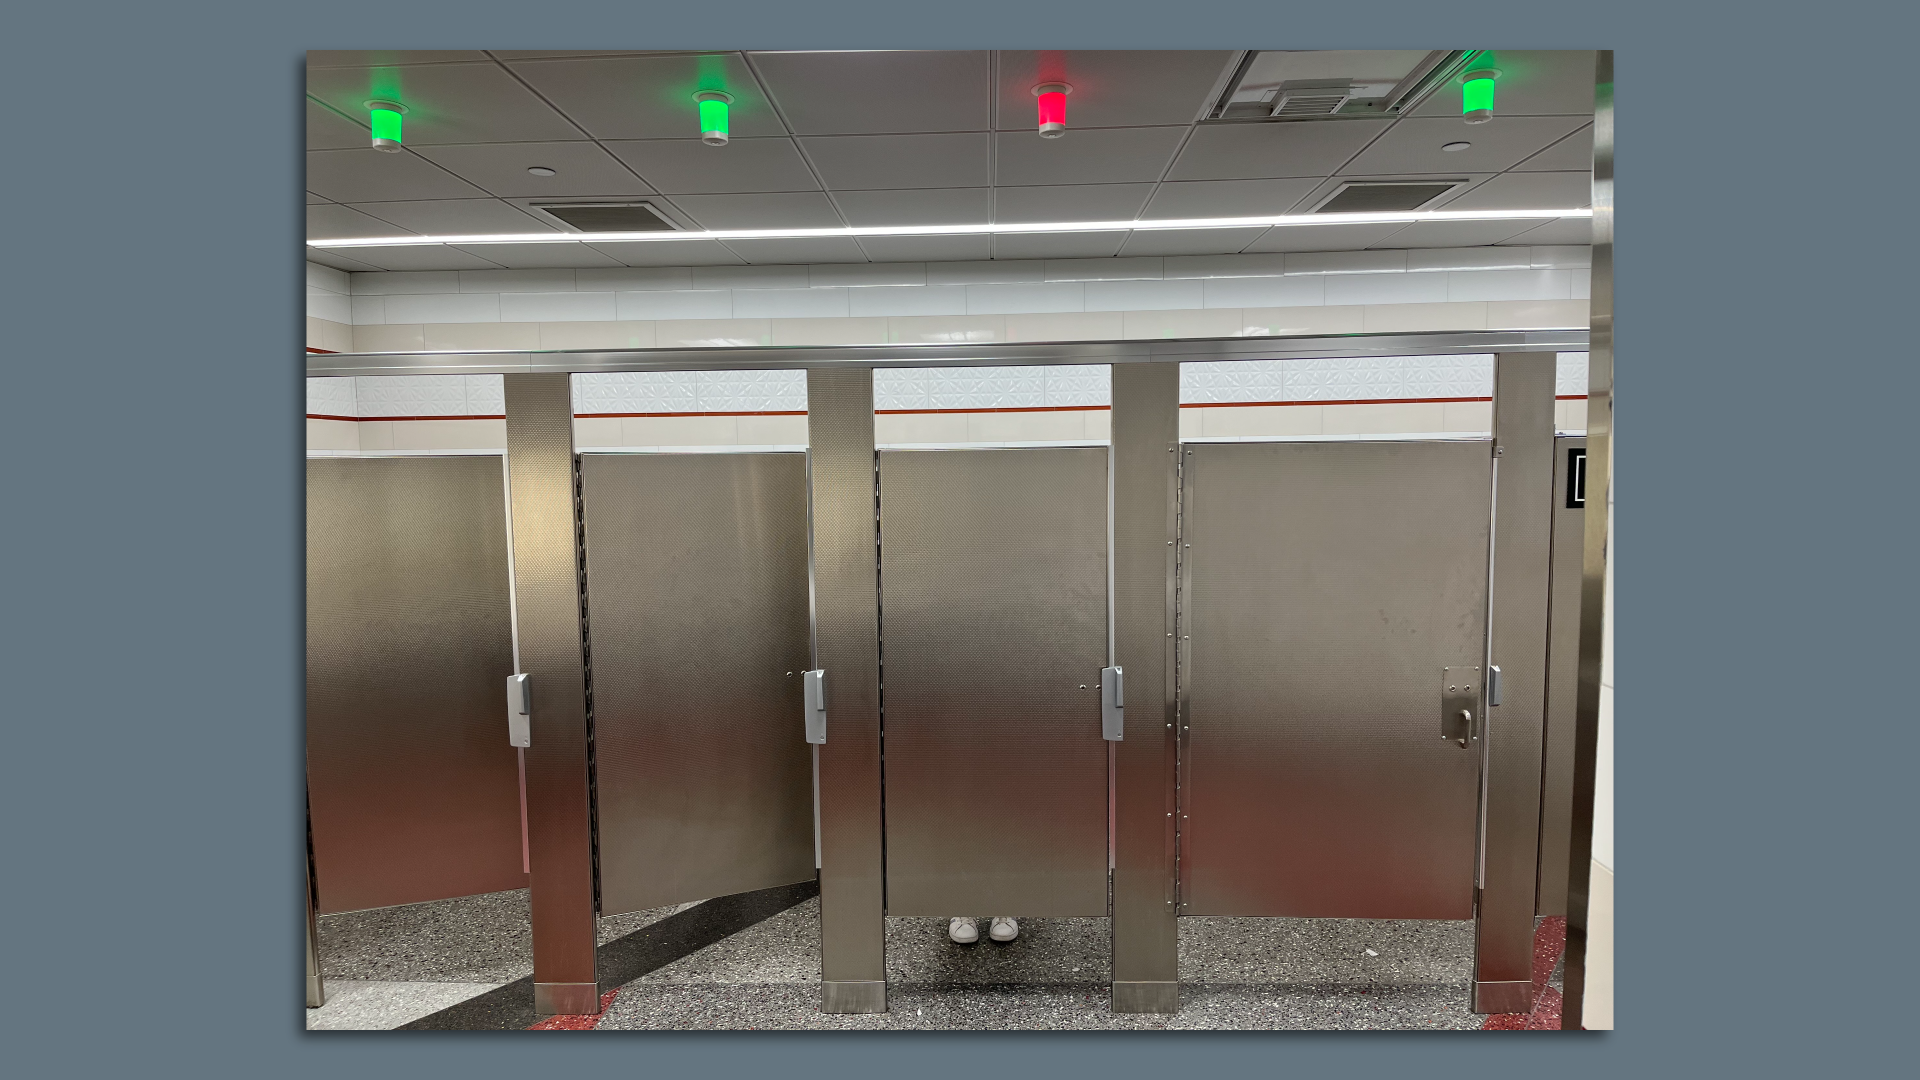 A restroom with lights overhead indicating which stalls are filled.